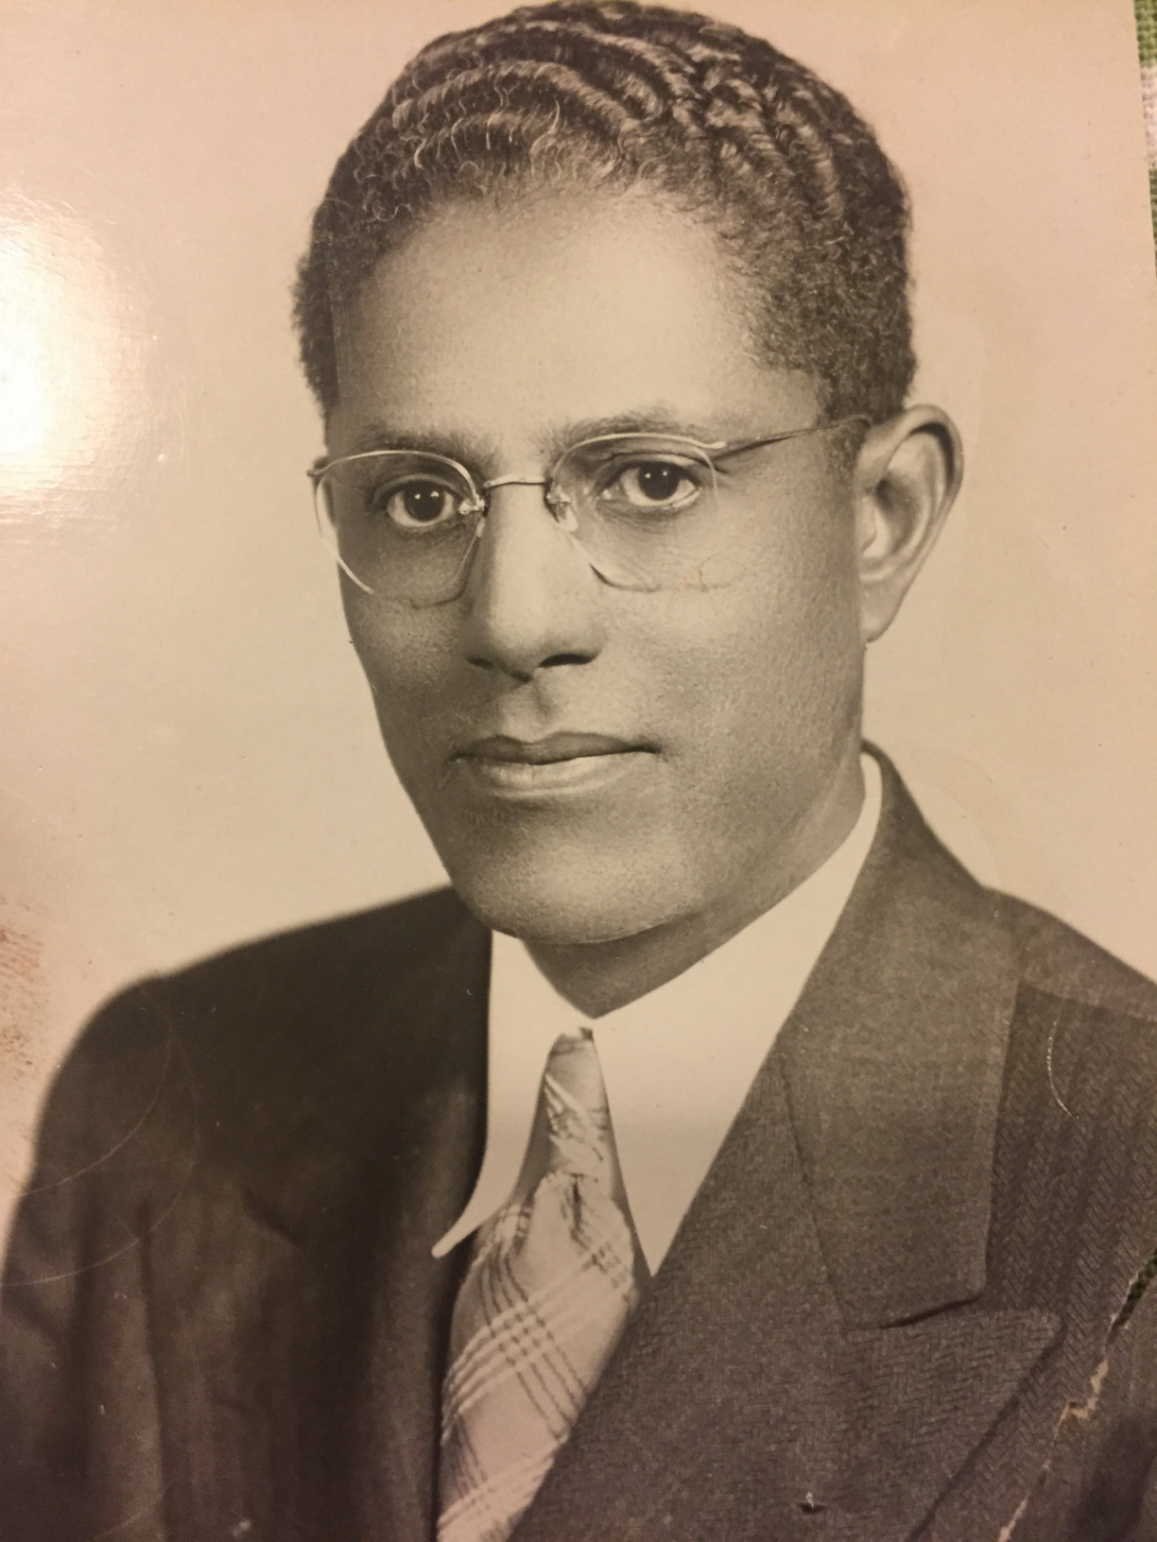 Ira Pulliam. Husband to Lucille. Father. Insurance Salesman. My Great-Grandfather.